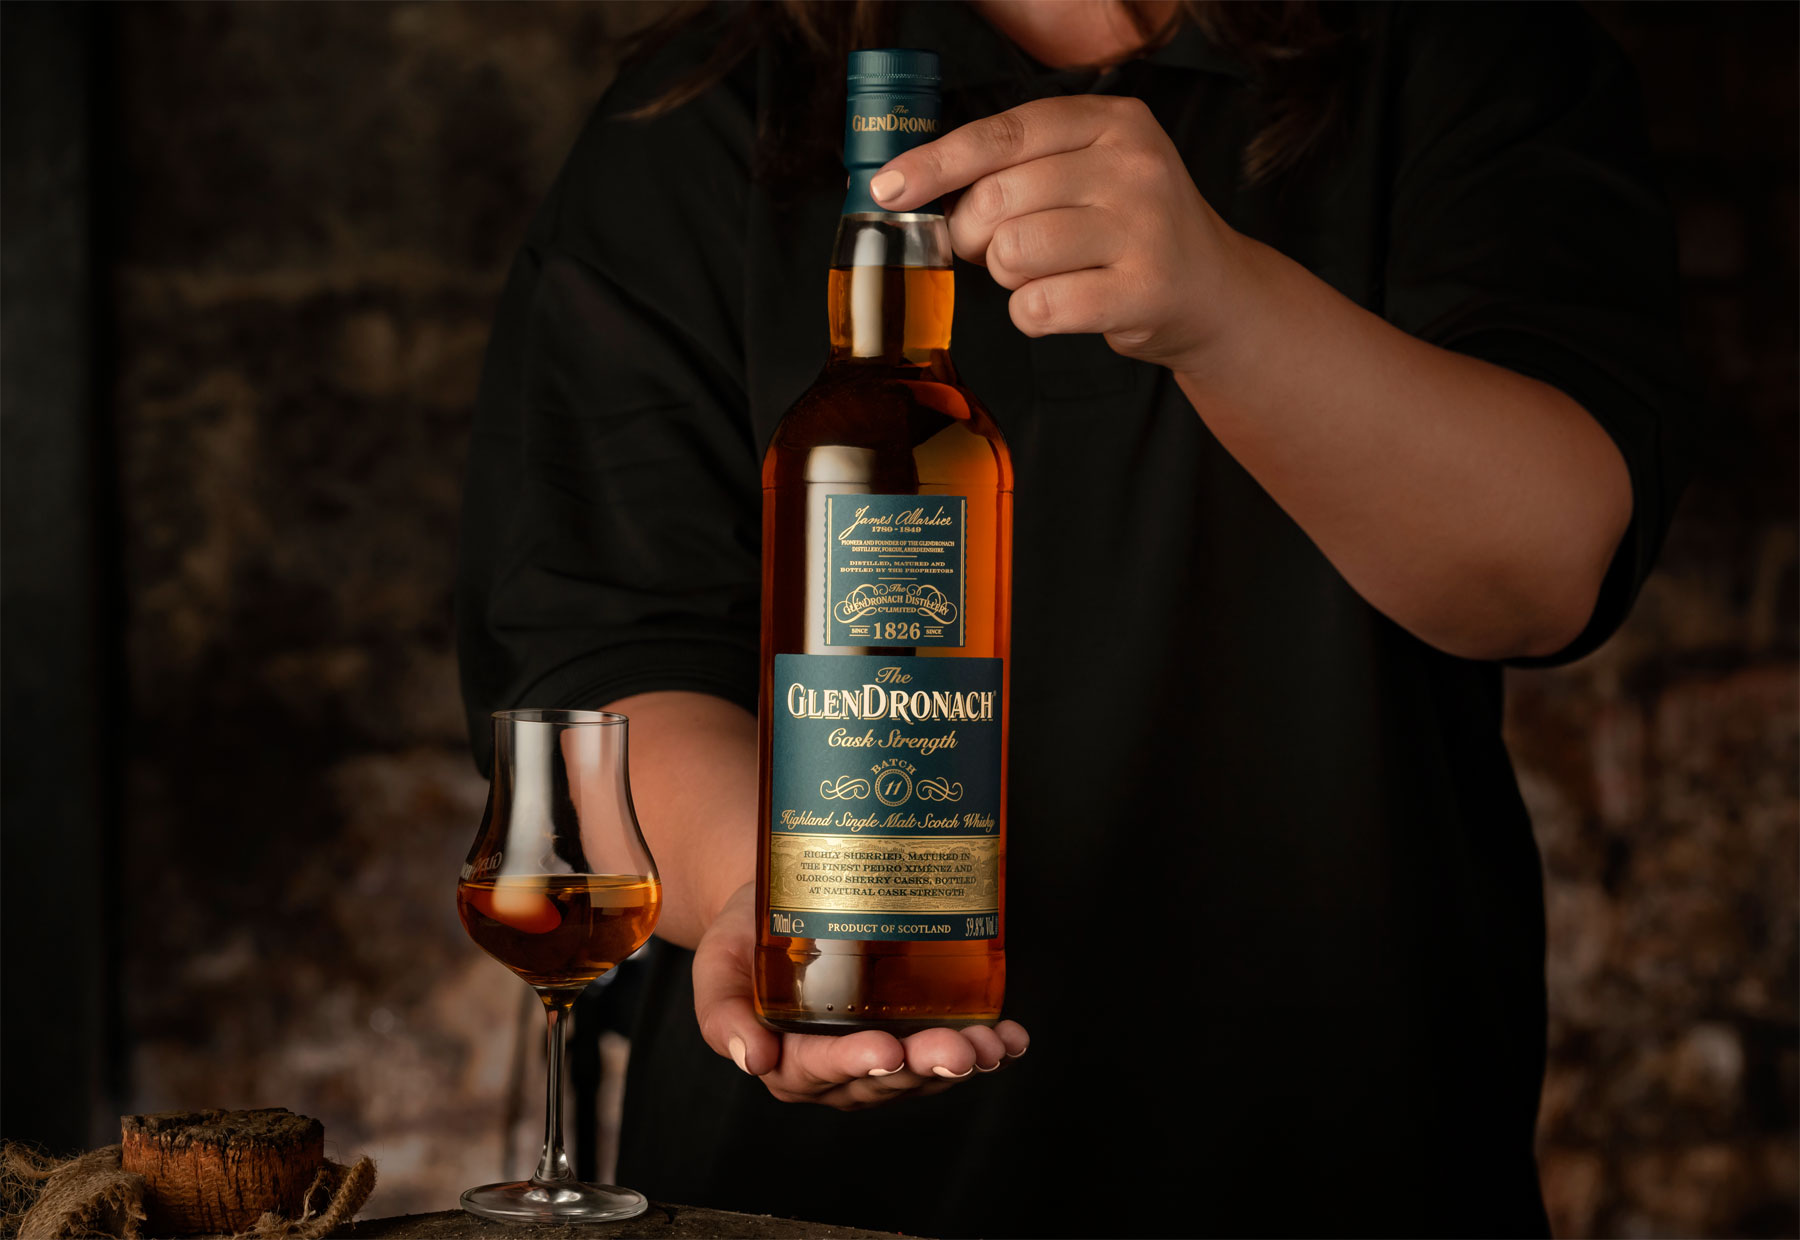 Cask Strength Batch 11, The Latest Release From The GlenDronach